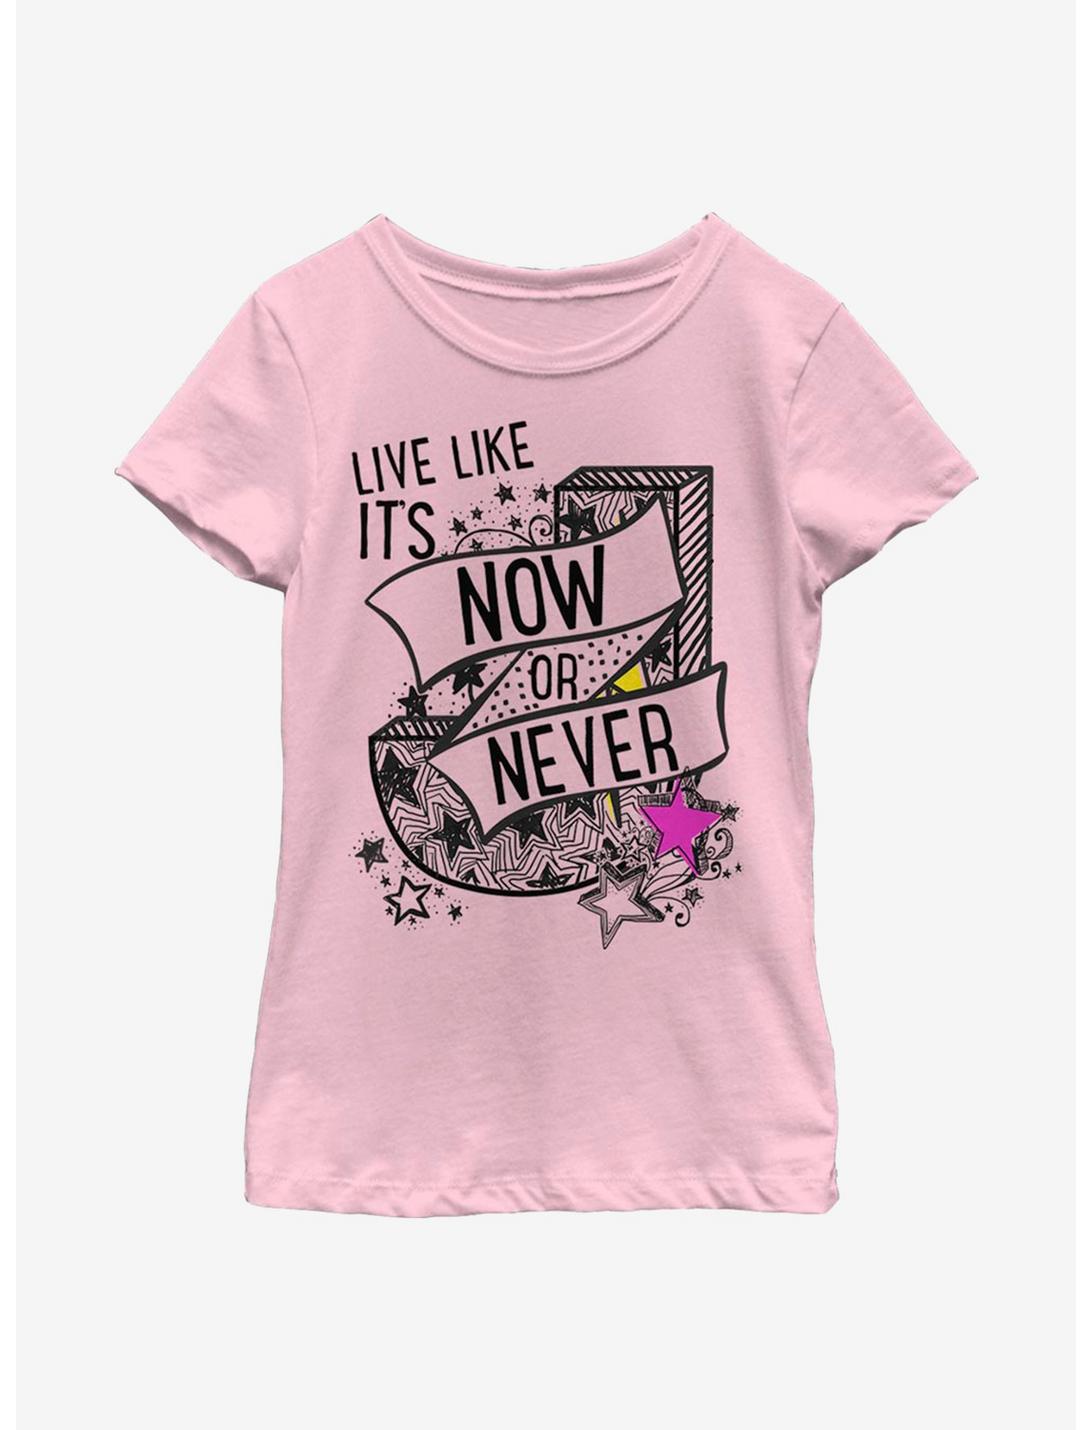 Julie And The Phantoms Now Or Never Youth Girls T-Shirt, PINK, hi-res